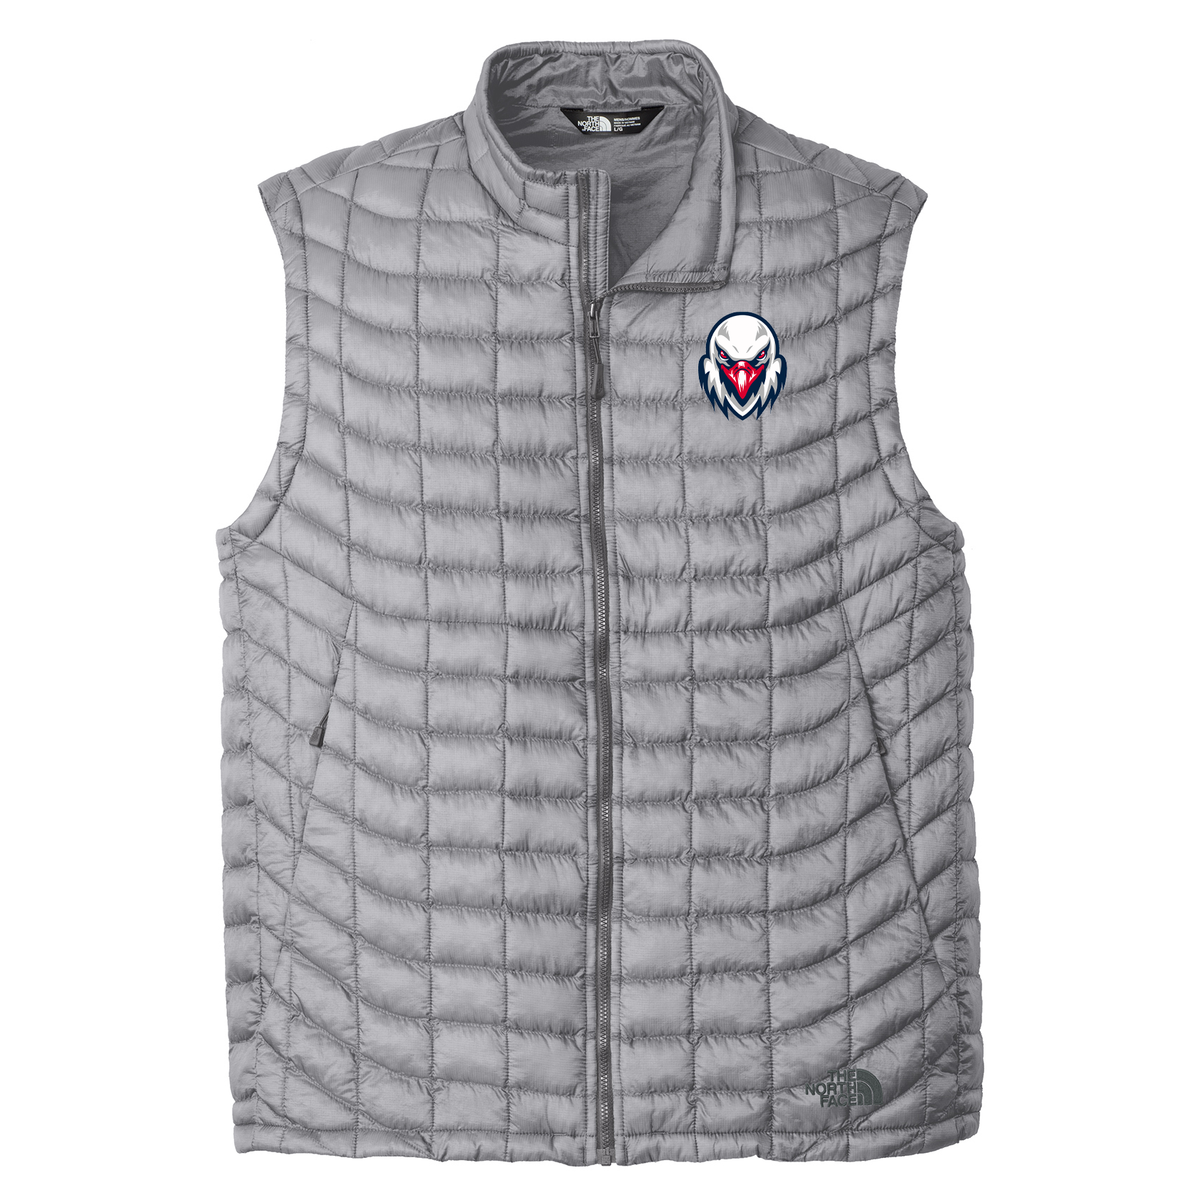 Cold Spring Harbor PAL The North Face Thermoball Vest